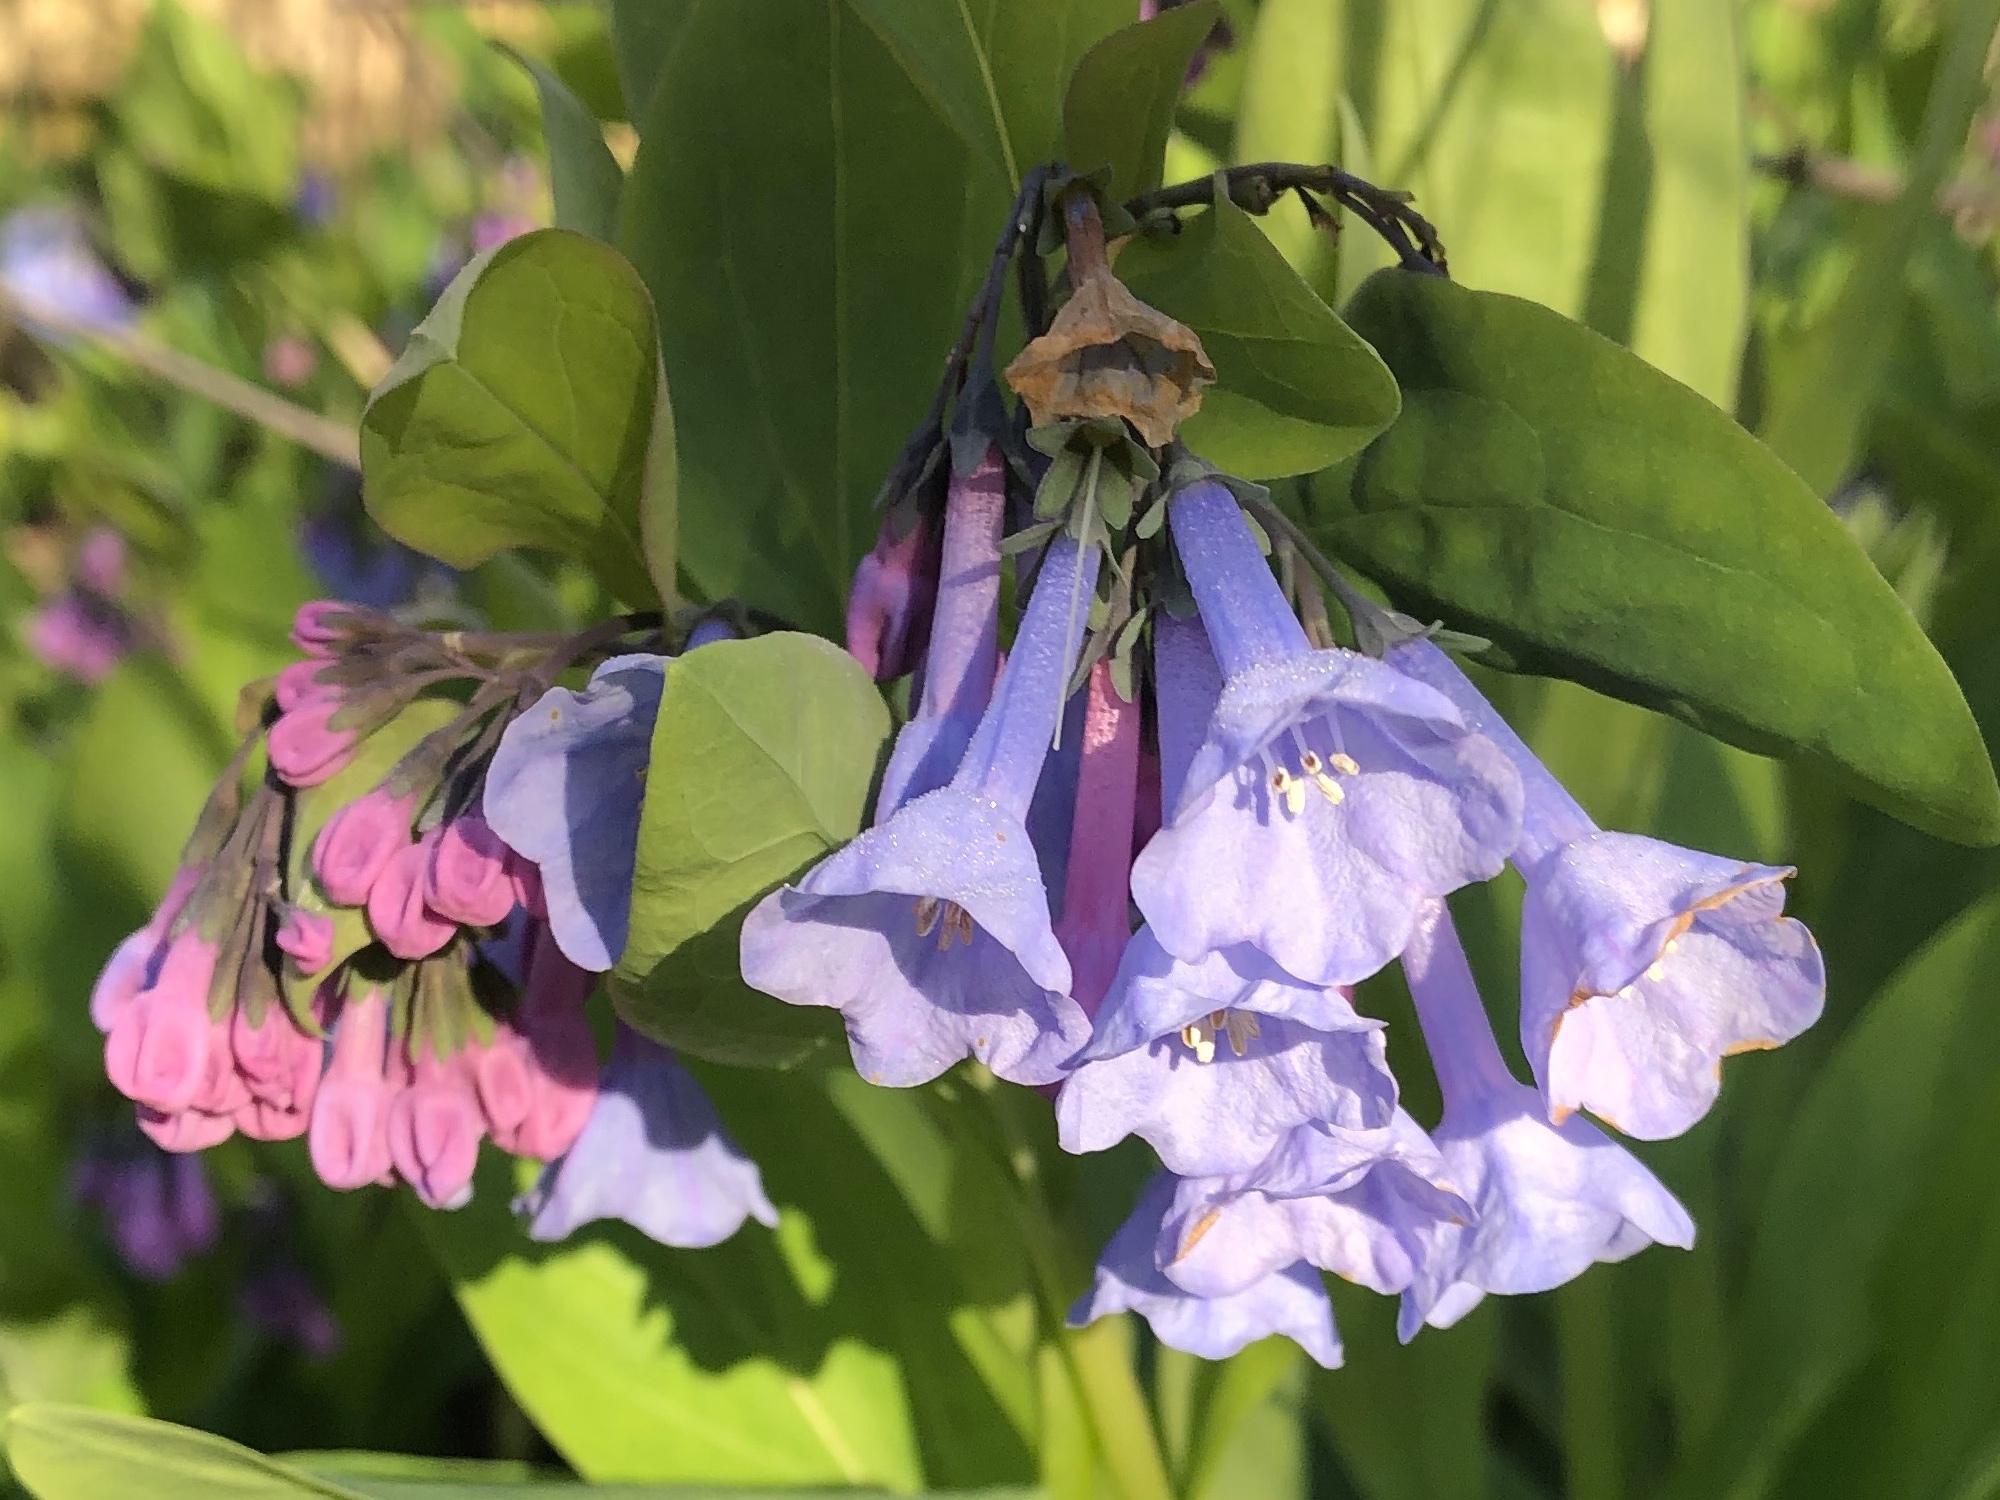 Virginia Bluebells by Duck Ponda in Madison, Wisconsin on April 16, 2021.